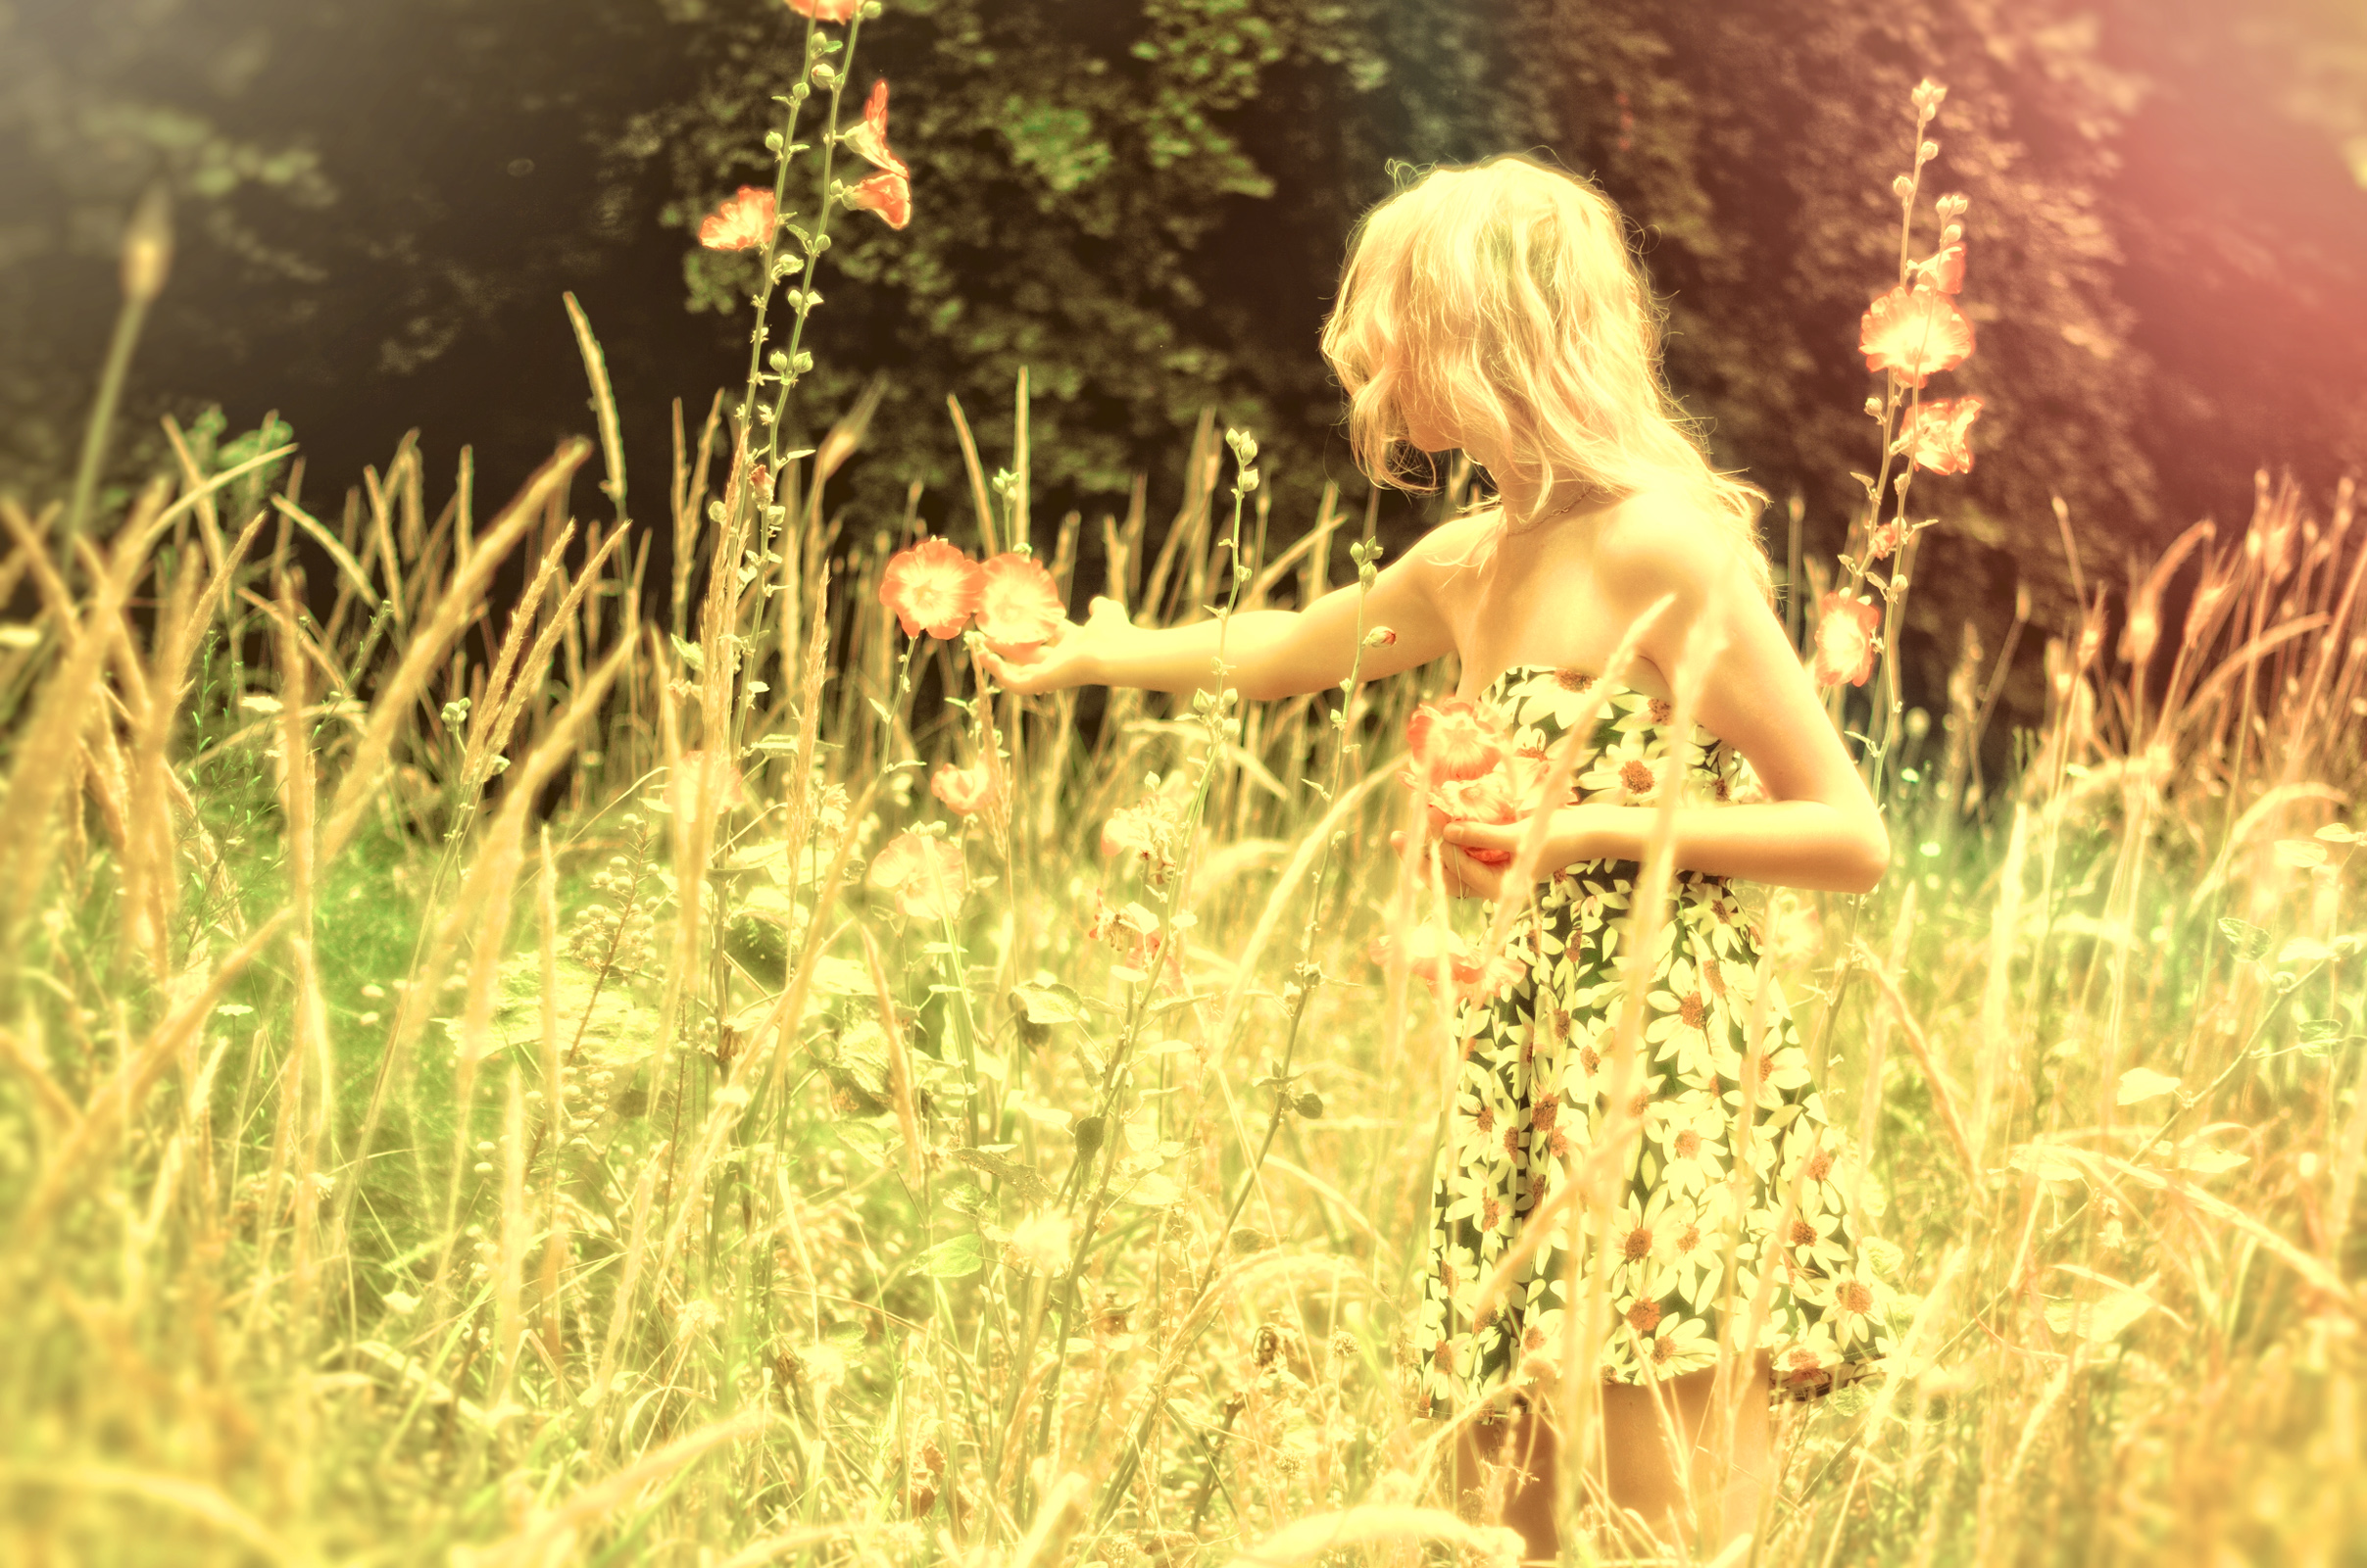 Hazy vintage looks - girl collecting flowers photo